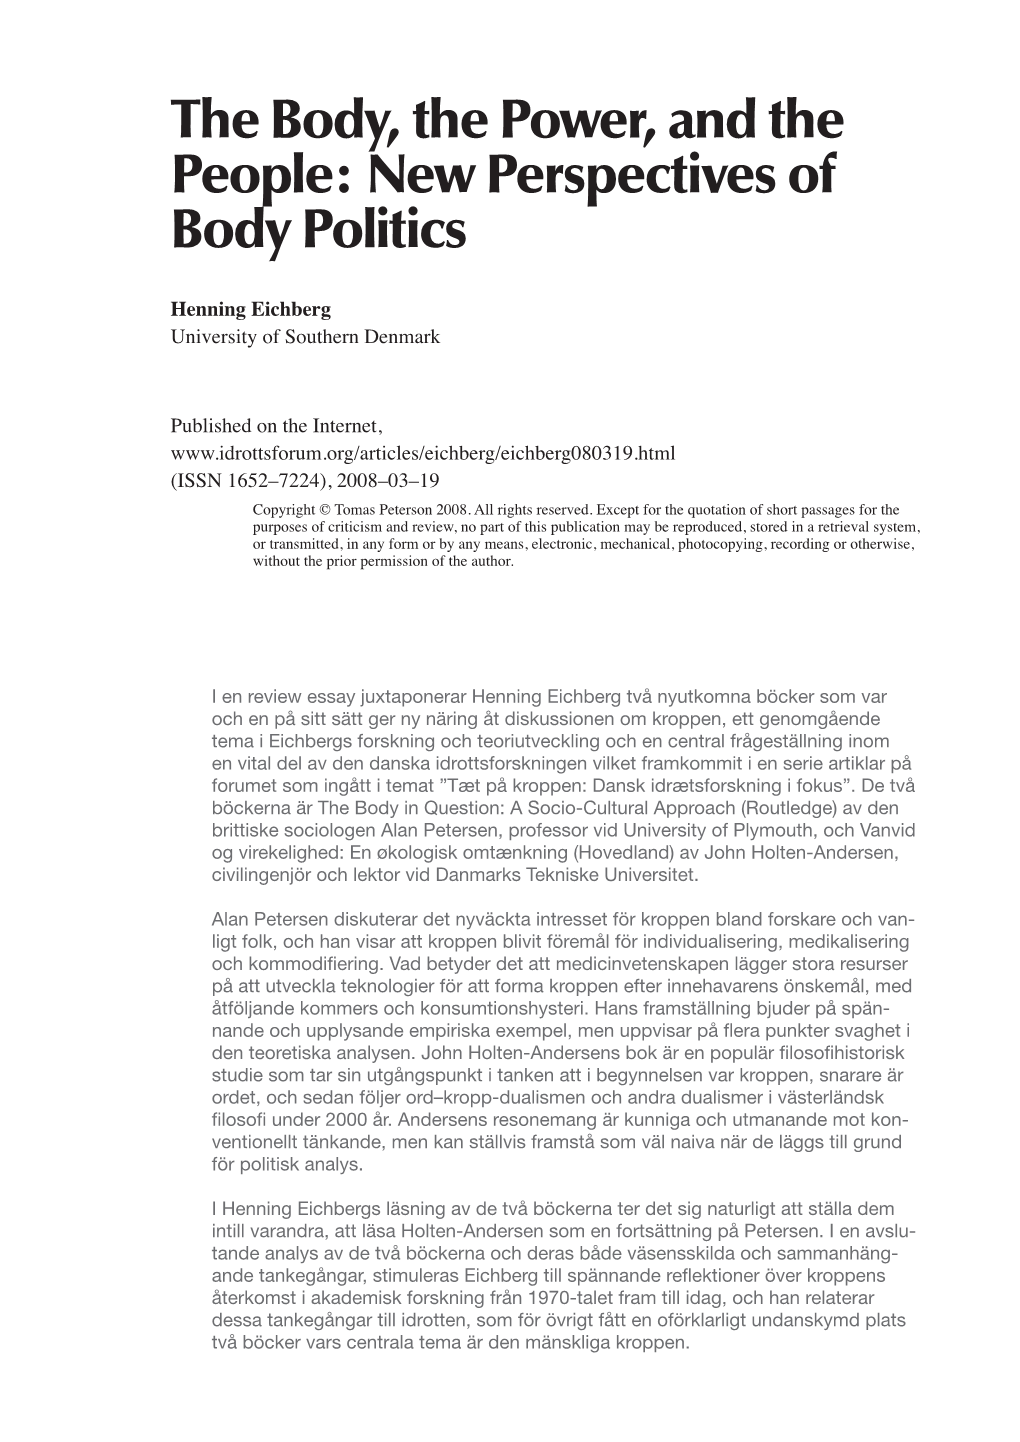 New Perspectives of Body Politics